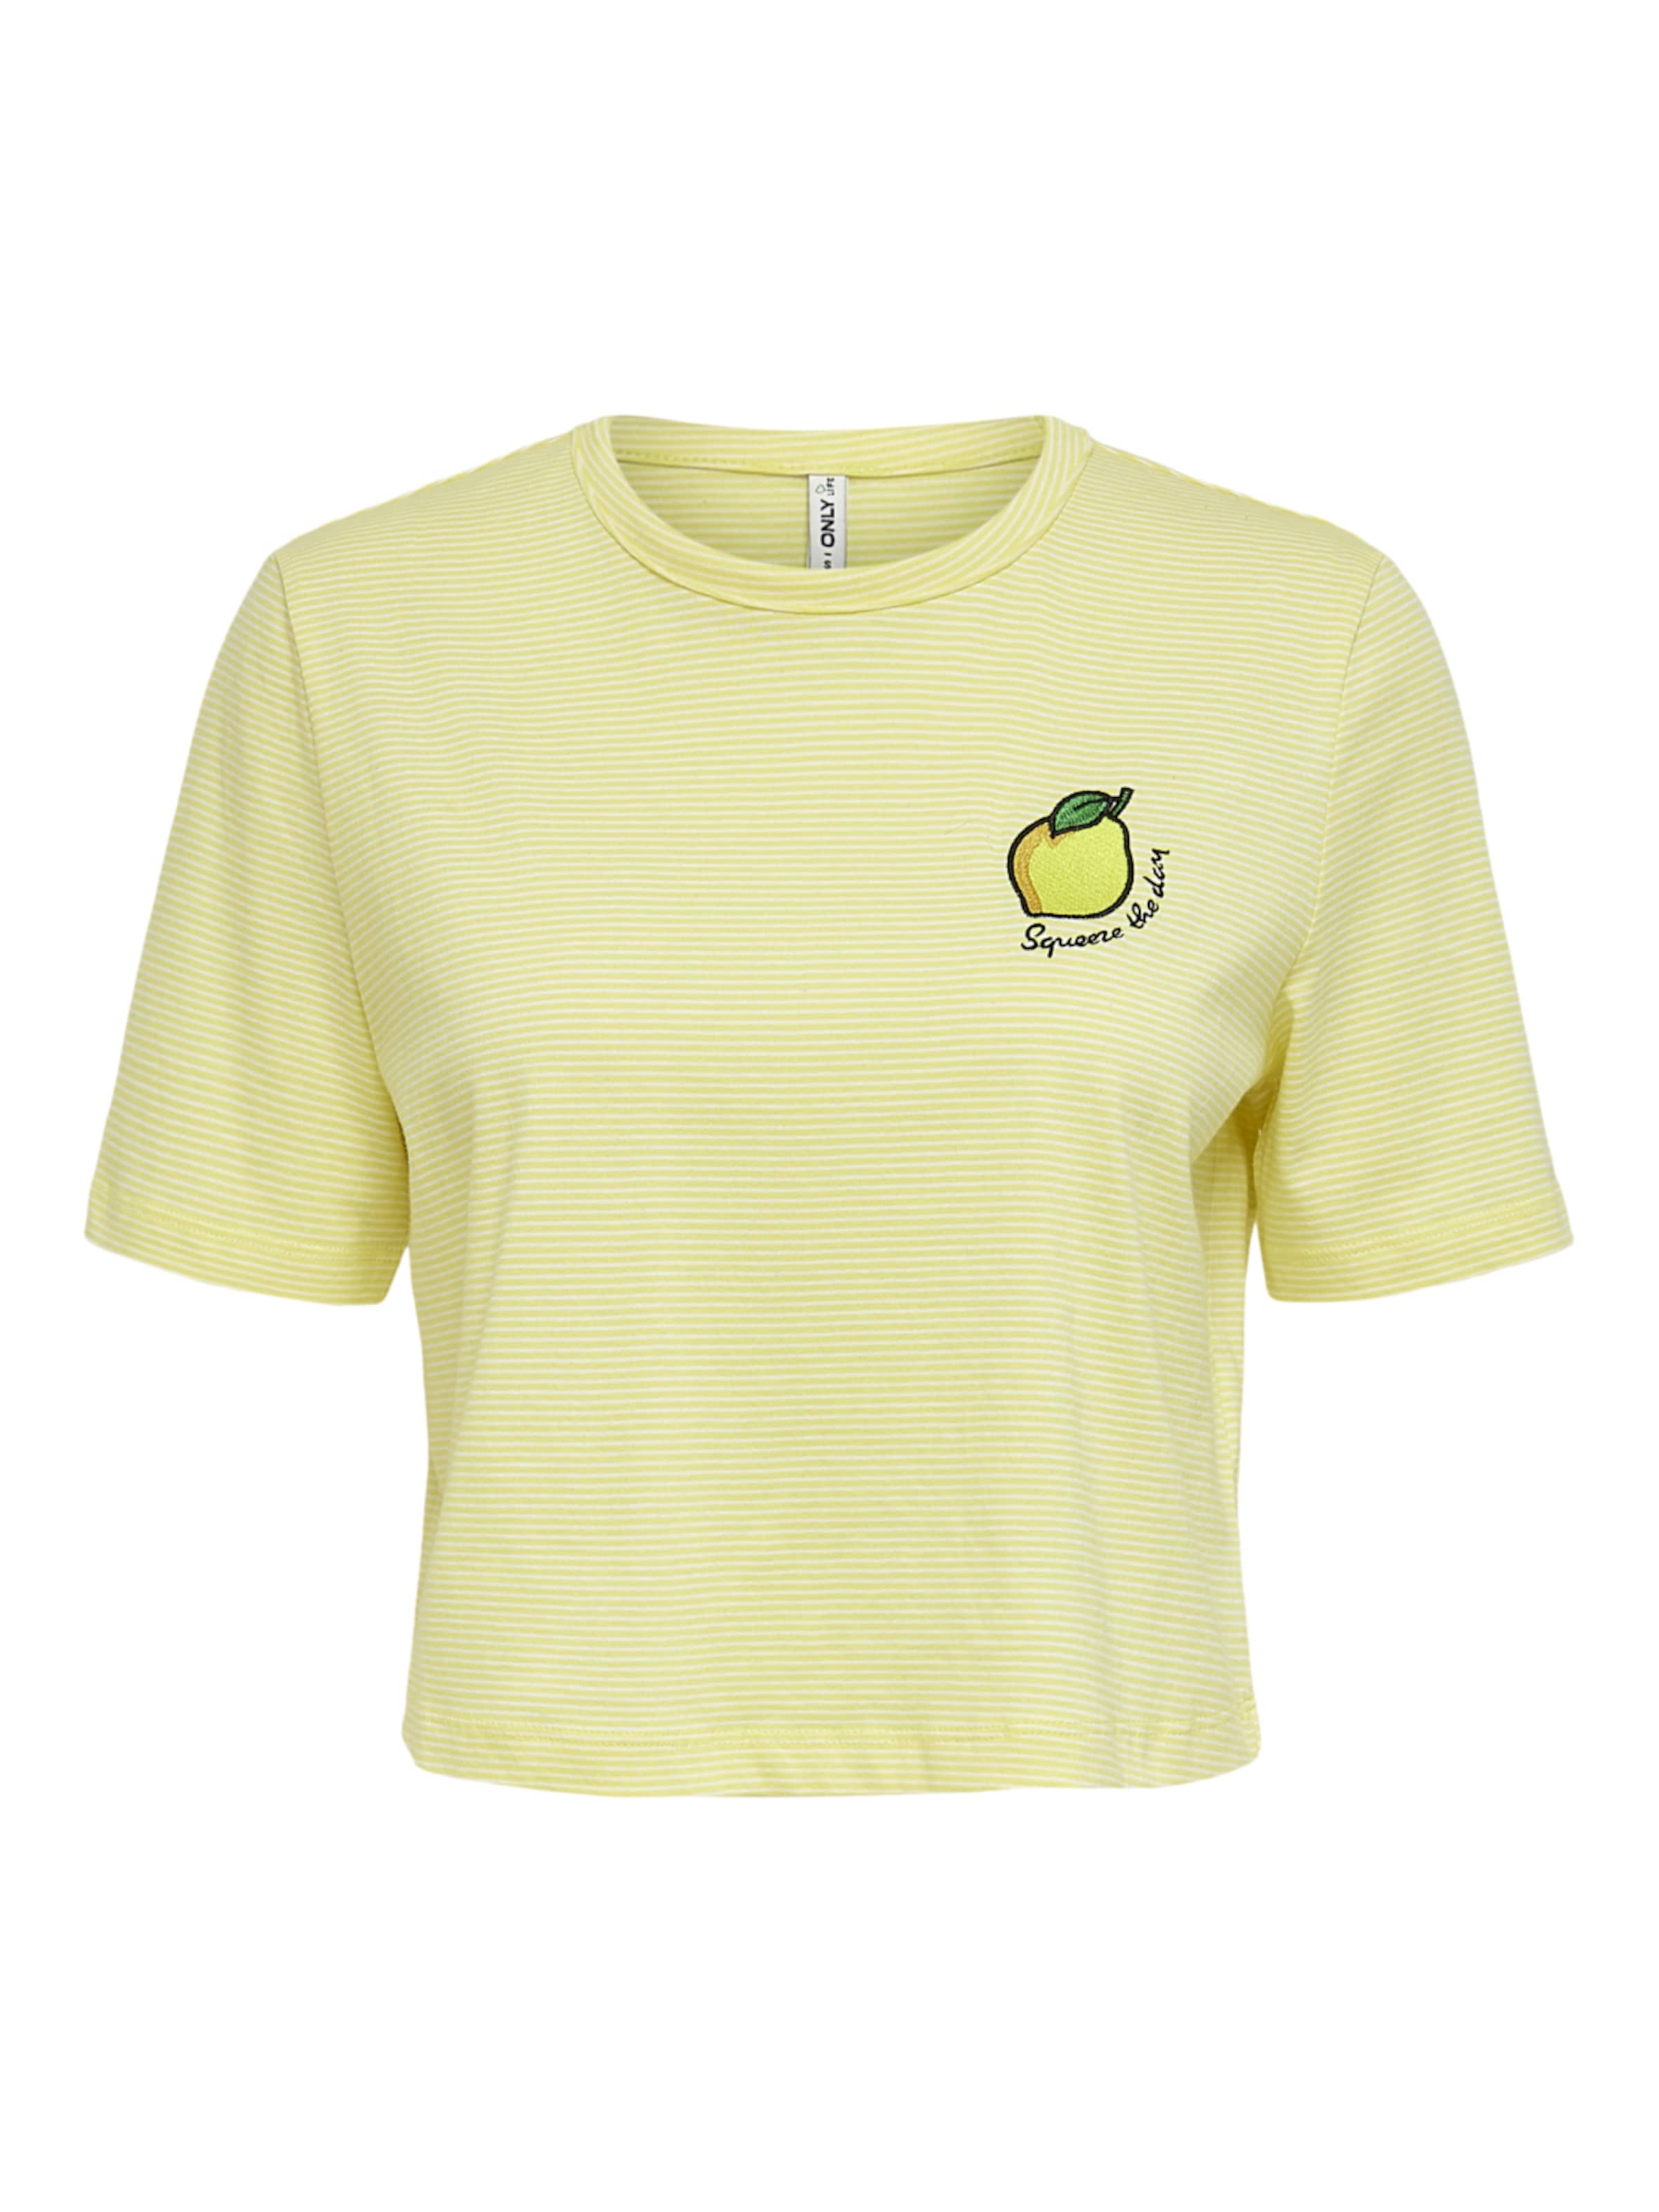 ONLY T-Shirt Fruity in Gelb 